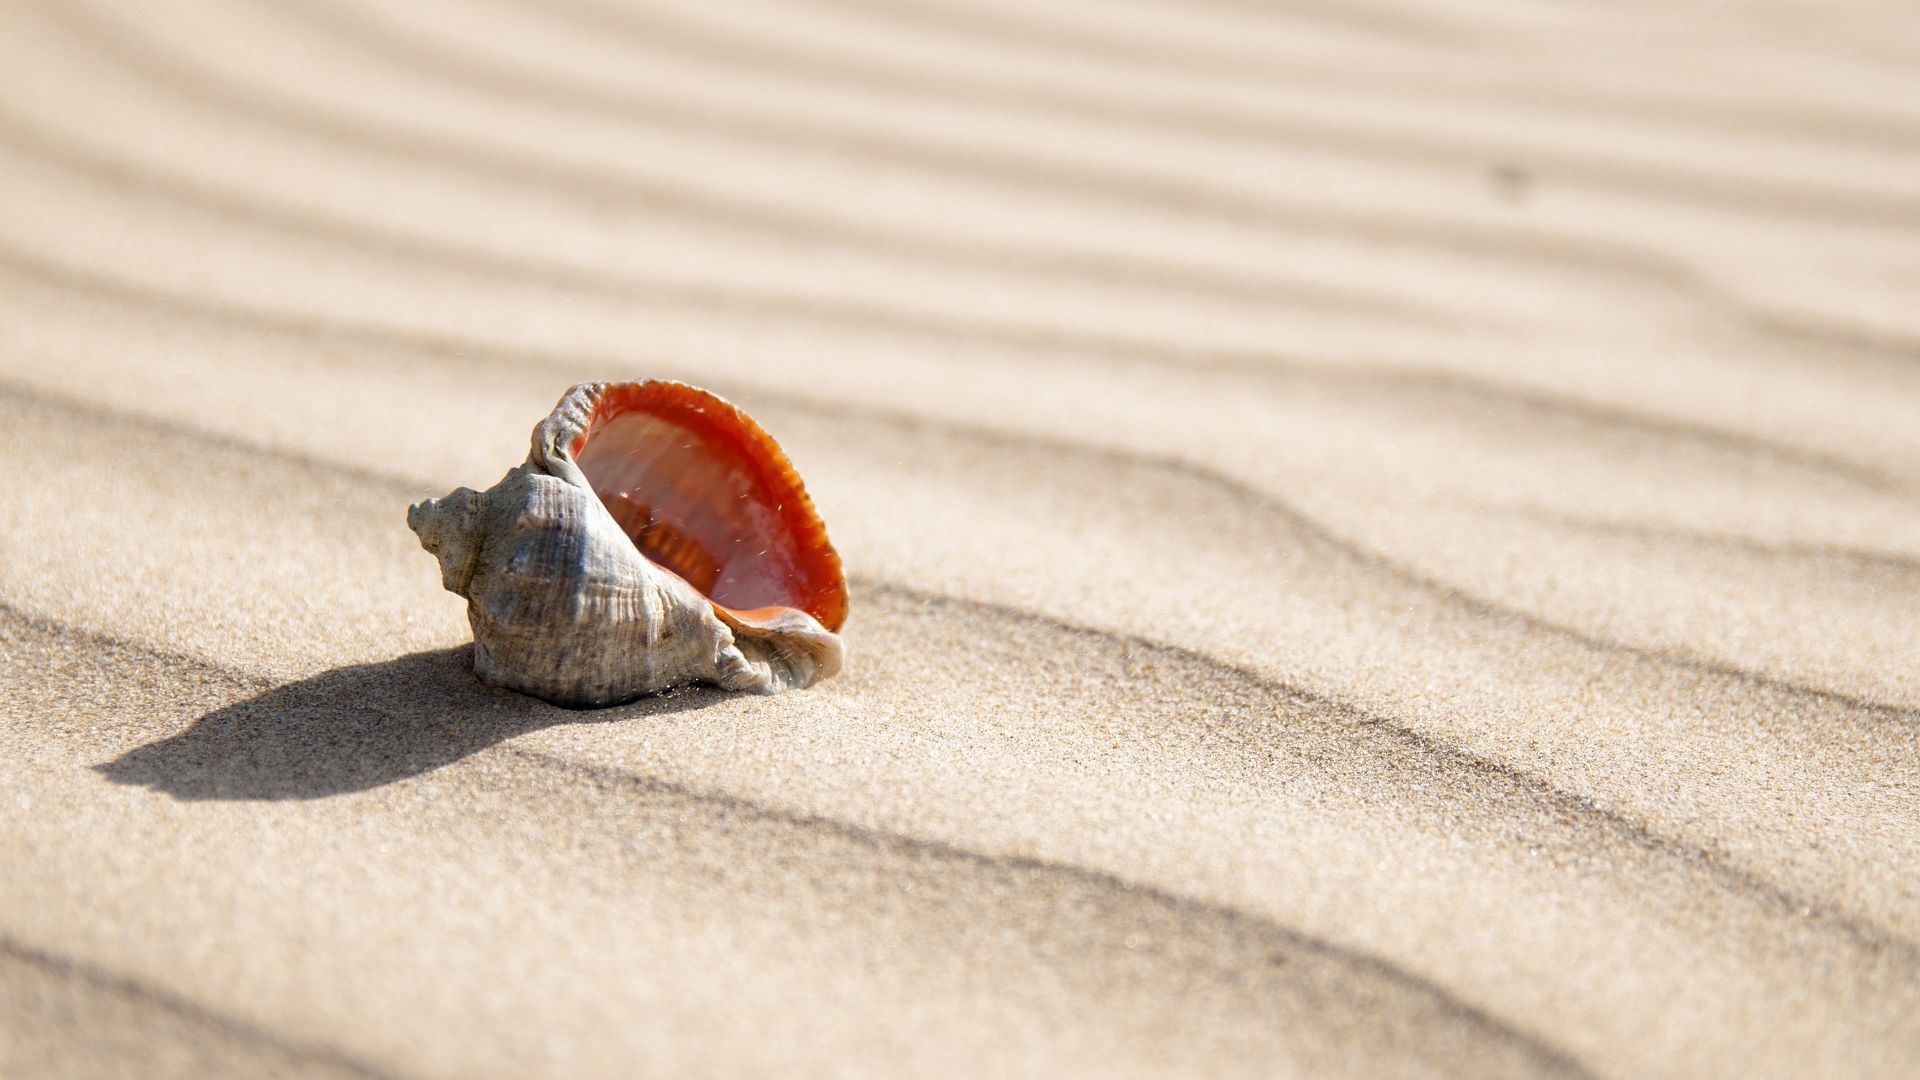 1920x1080 Desktop Wallpaper Seashell In The Sand , Hd Image, Picture, Background, Pywfed